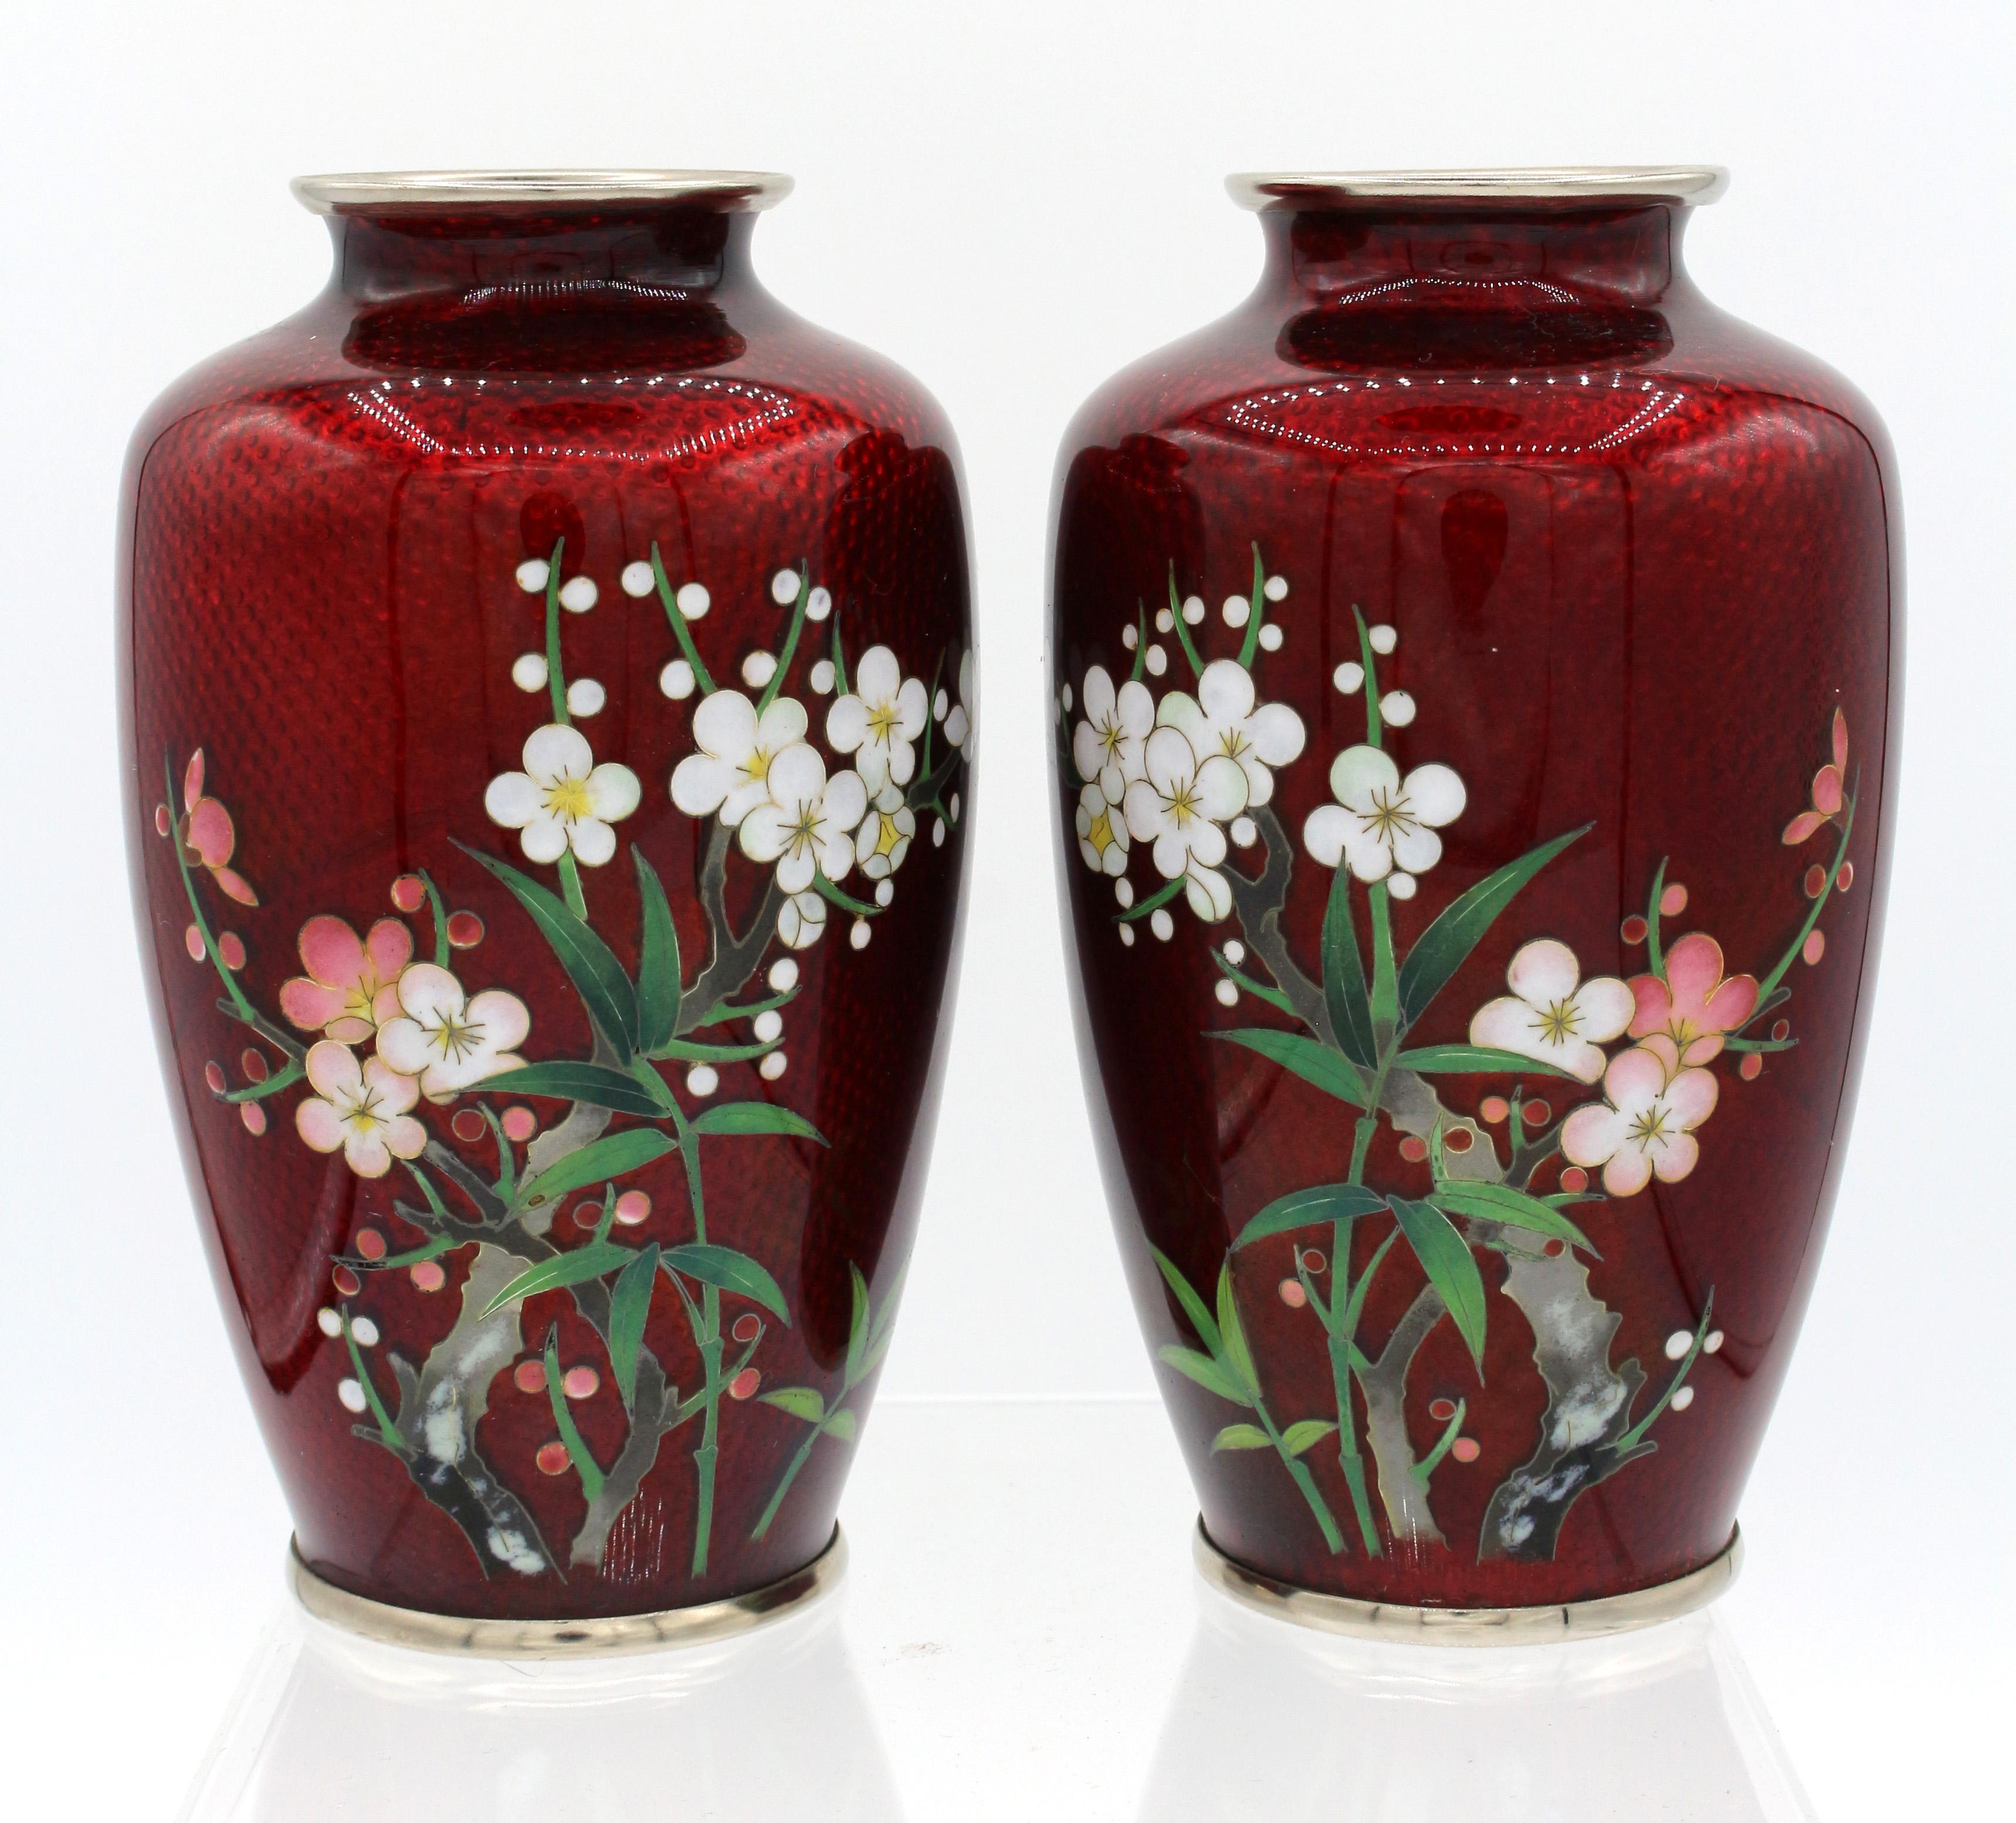 Mid-20th century pair of cloisonné vases, Japanese. Ginbari pigeon blood red with silver wires & mounts. Fine shading in the prunus & bamboo. Showa era. A mirrored, or facing, pair.
4 5/8